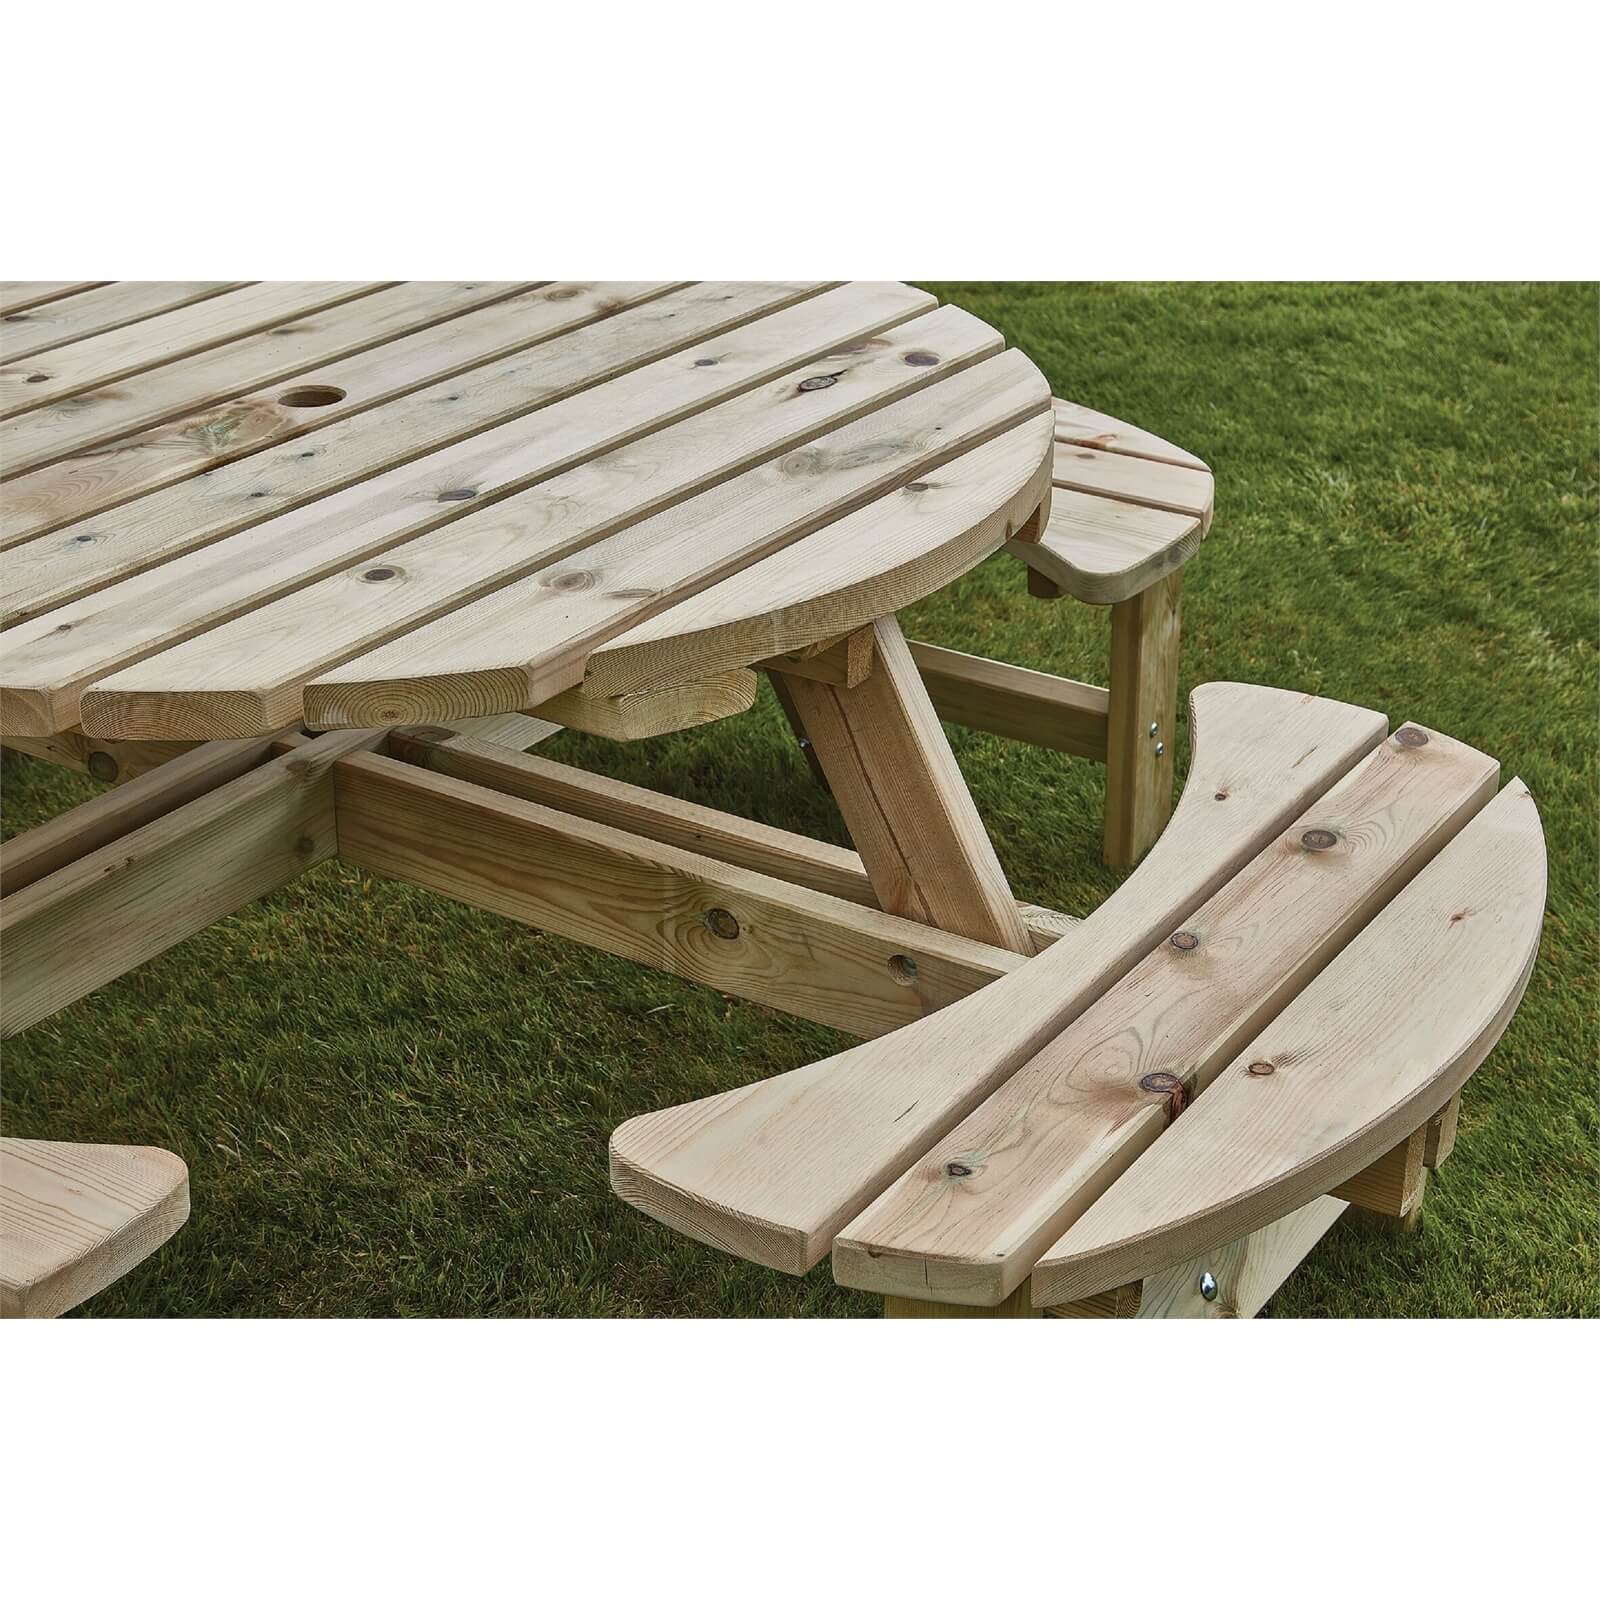 Anchor Fast FSC Milldale Round Picnic Bench